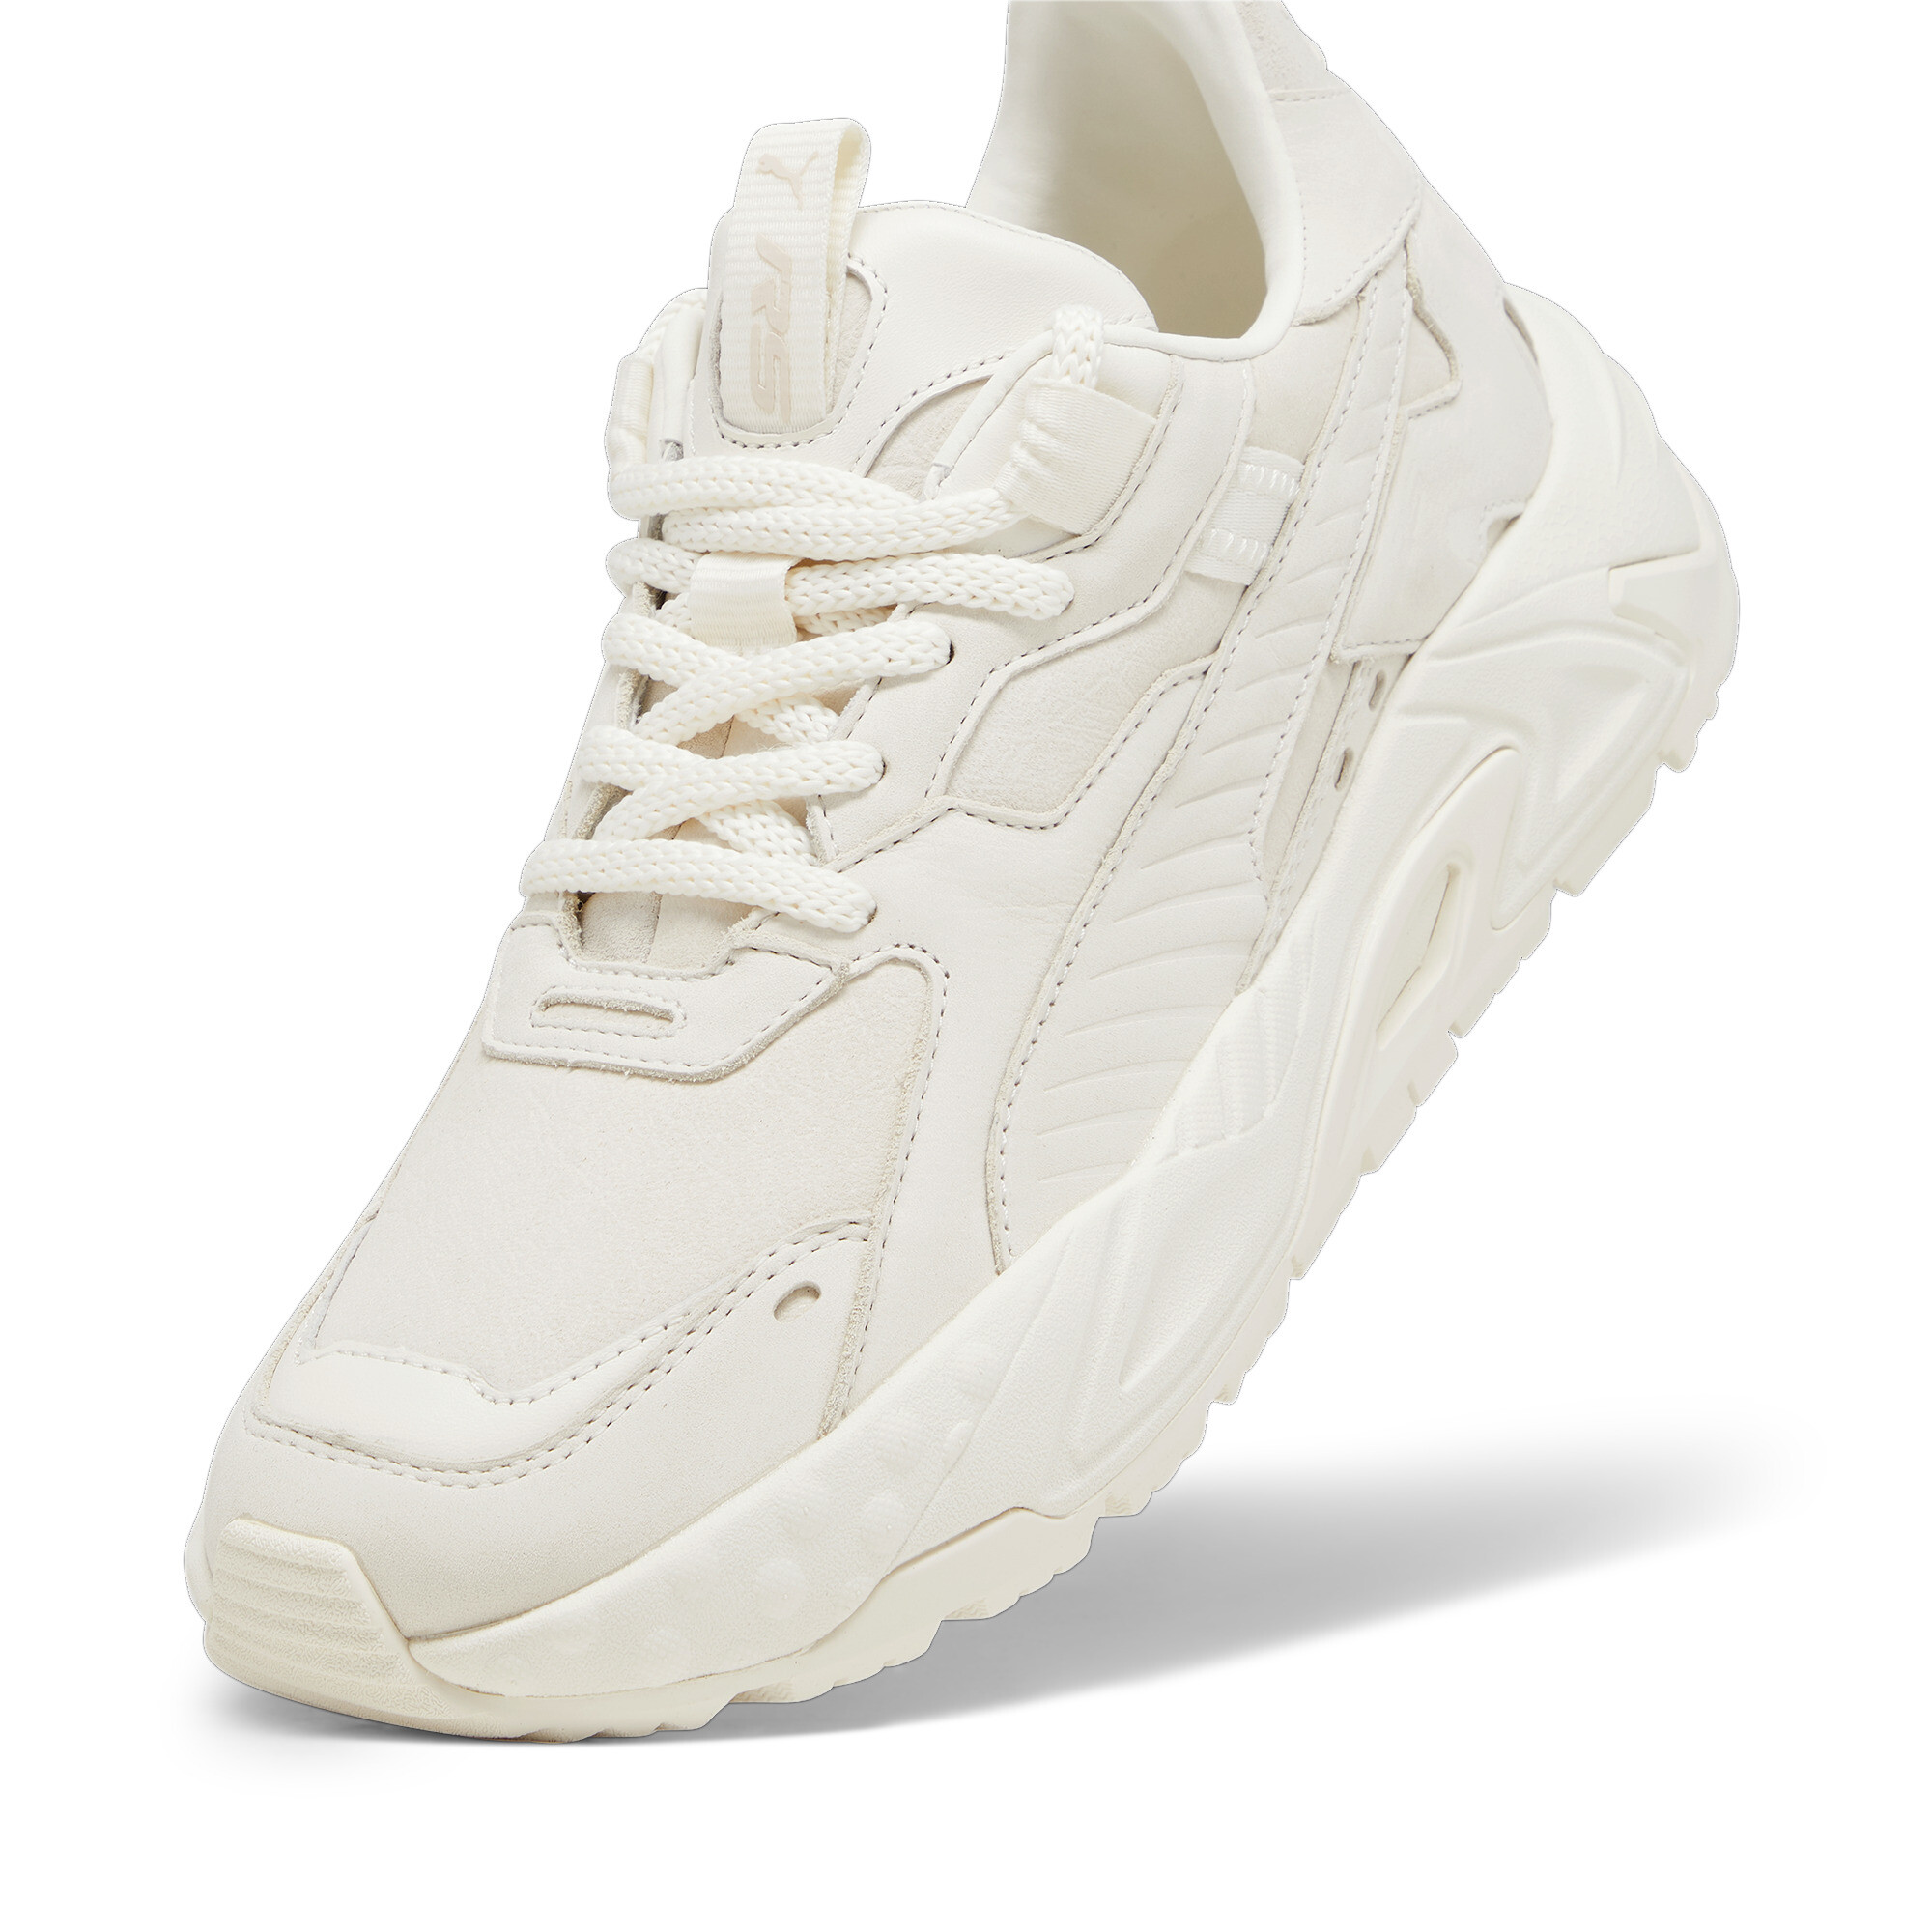 Puma RS-Trck Nubuck Sneakers, White, Size 37.5, Shoes